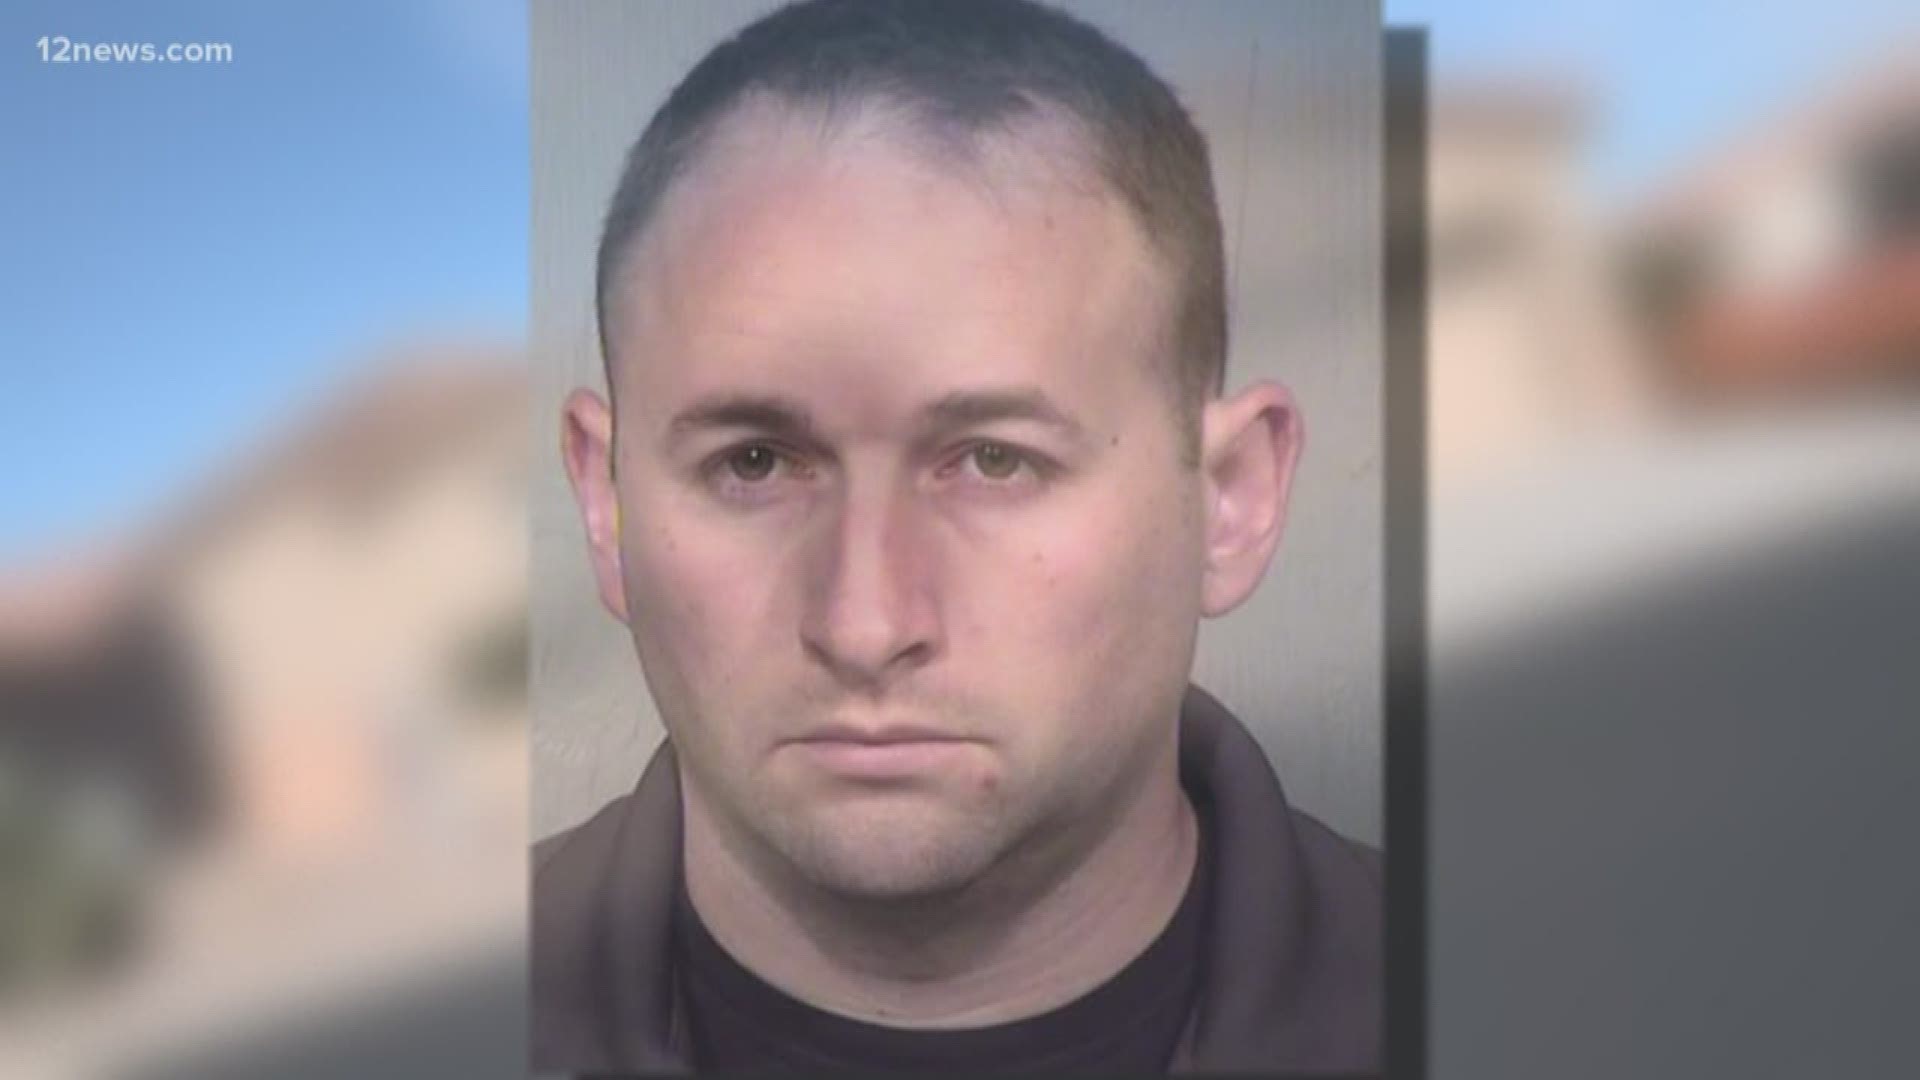 Sheriff's Deputy Gregory Johnson was caught stealing money from a dead person on his own body camera video. Johnson said he stole the cash because of financial troubles.